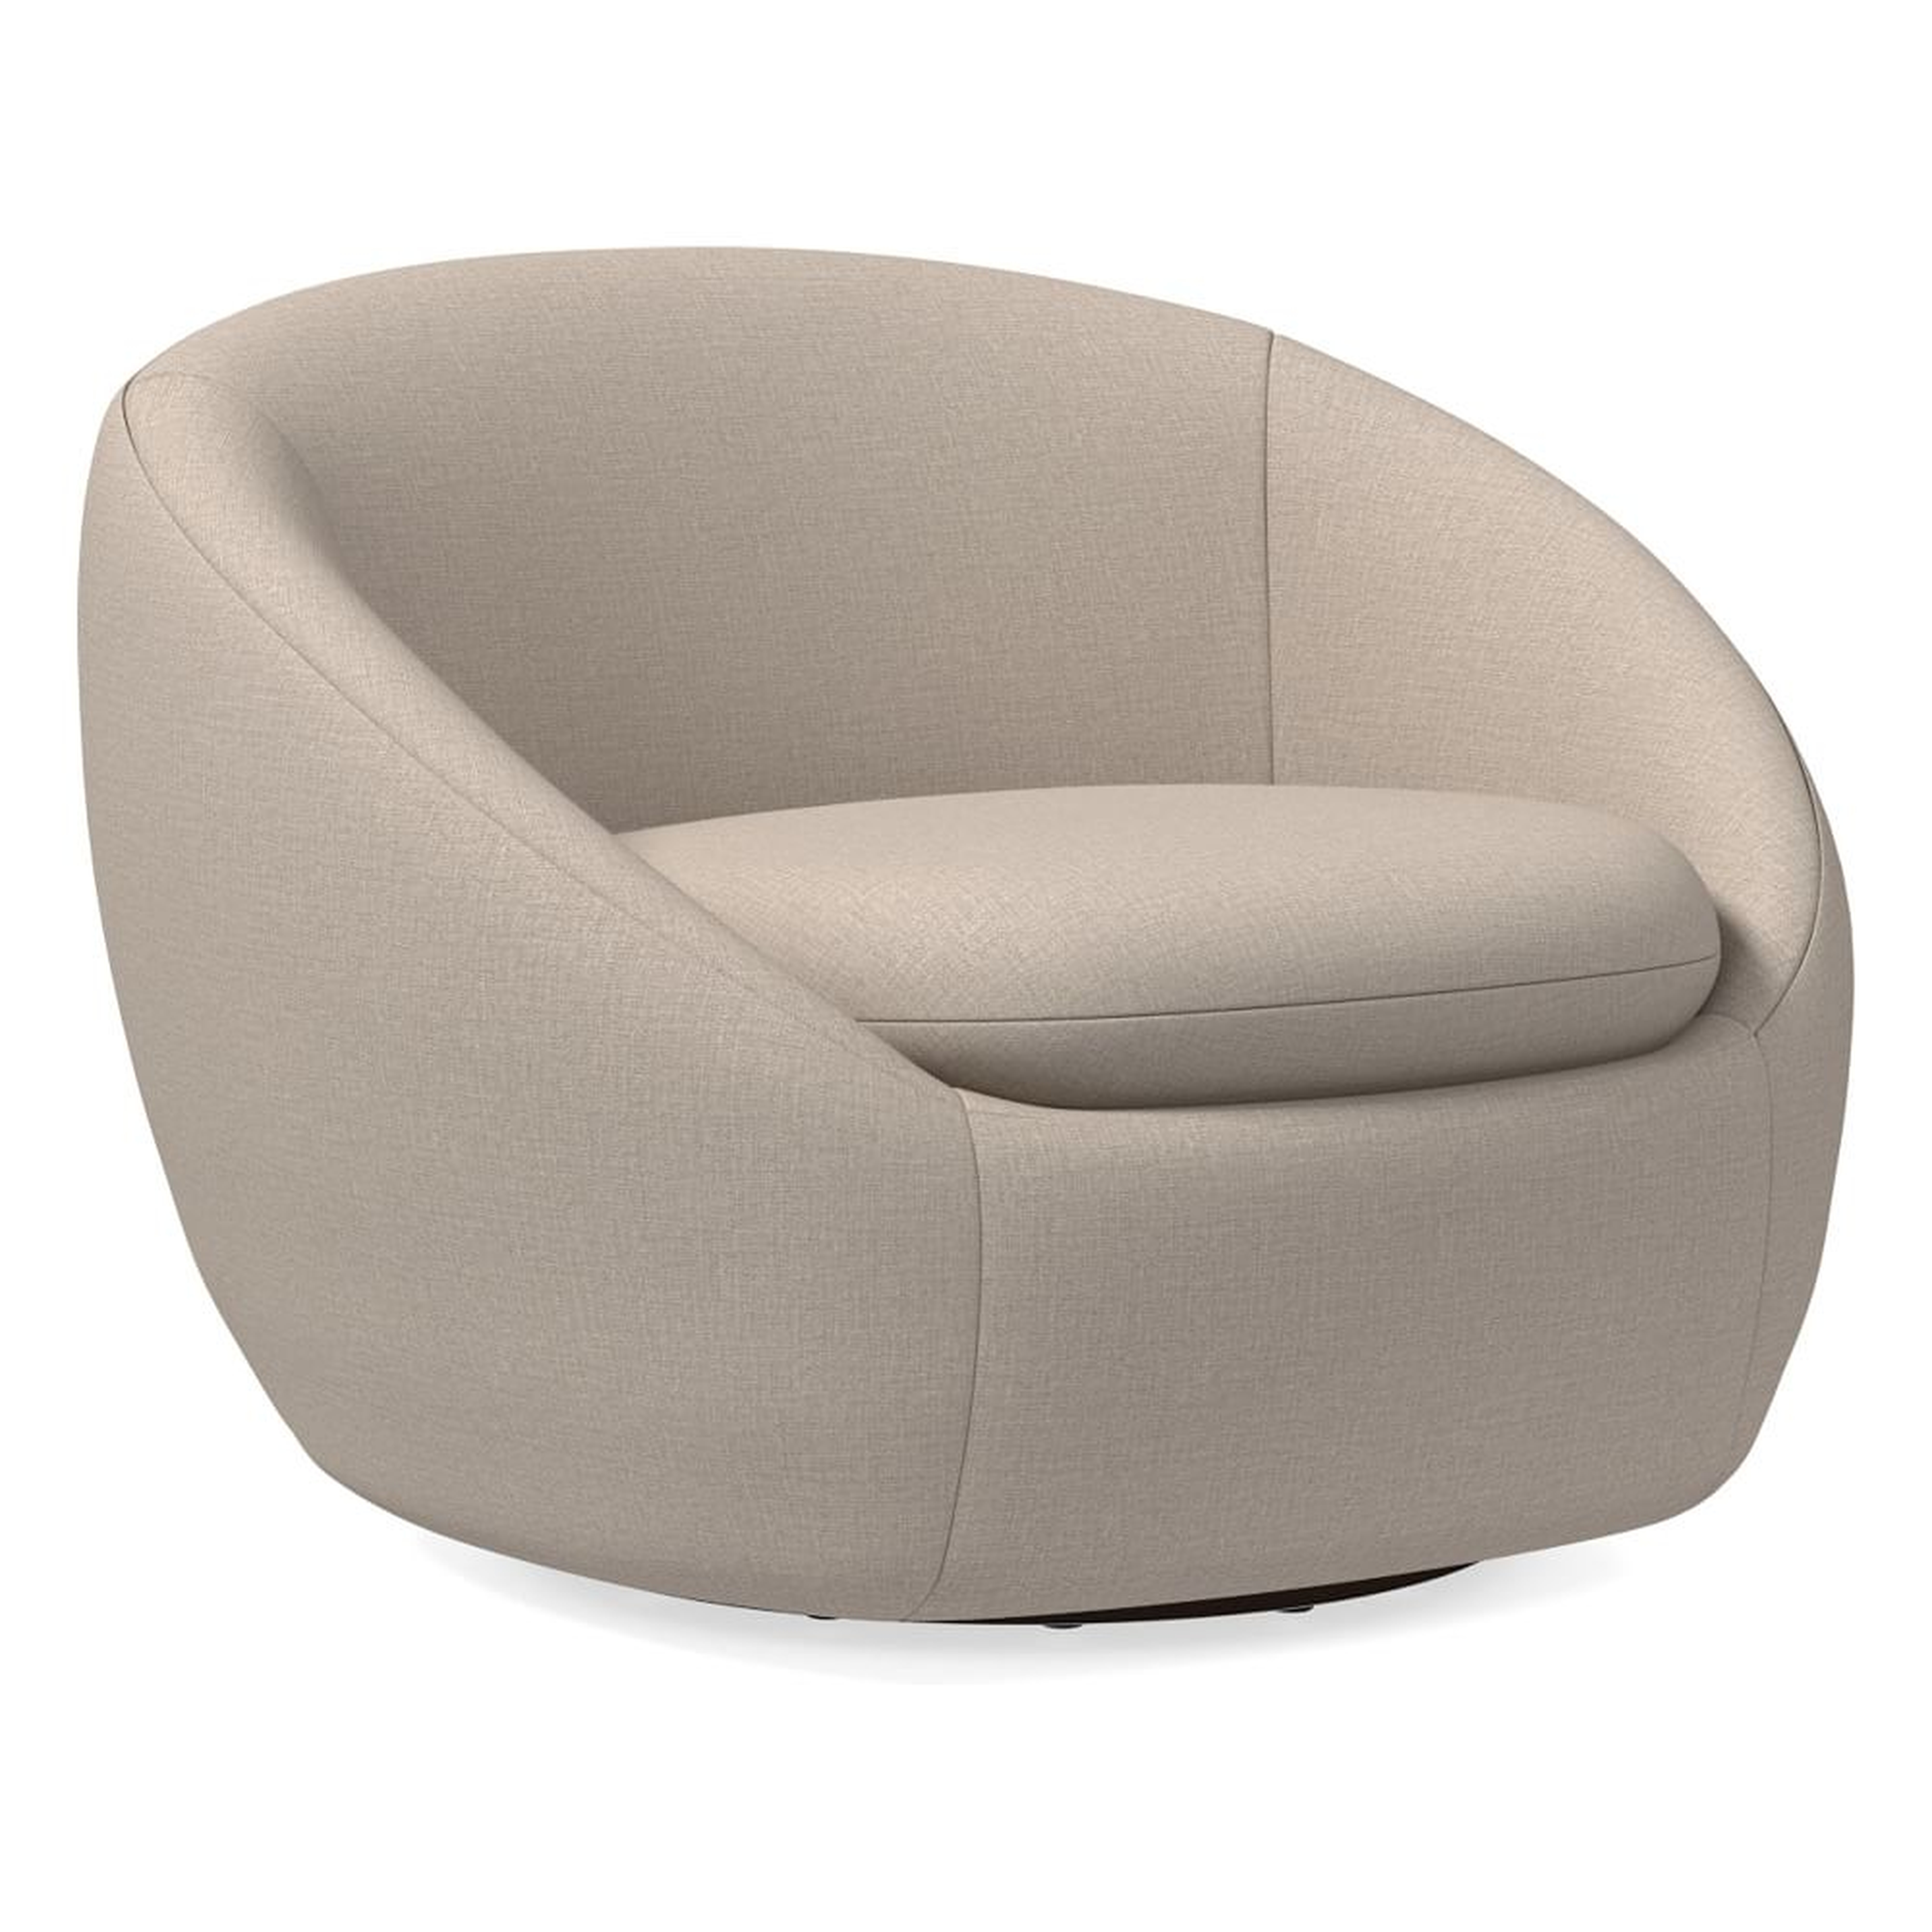 Cozy Swivel Chair, Poly, Yarn Dyed Linen Weave, Sand, Concealed Supports - West Elm